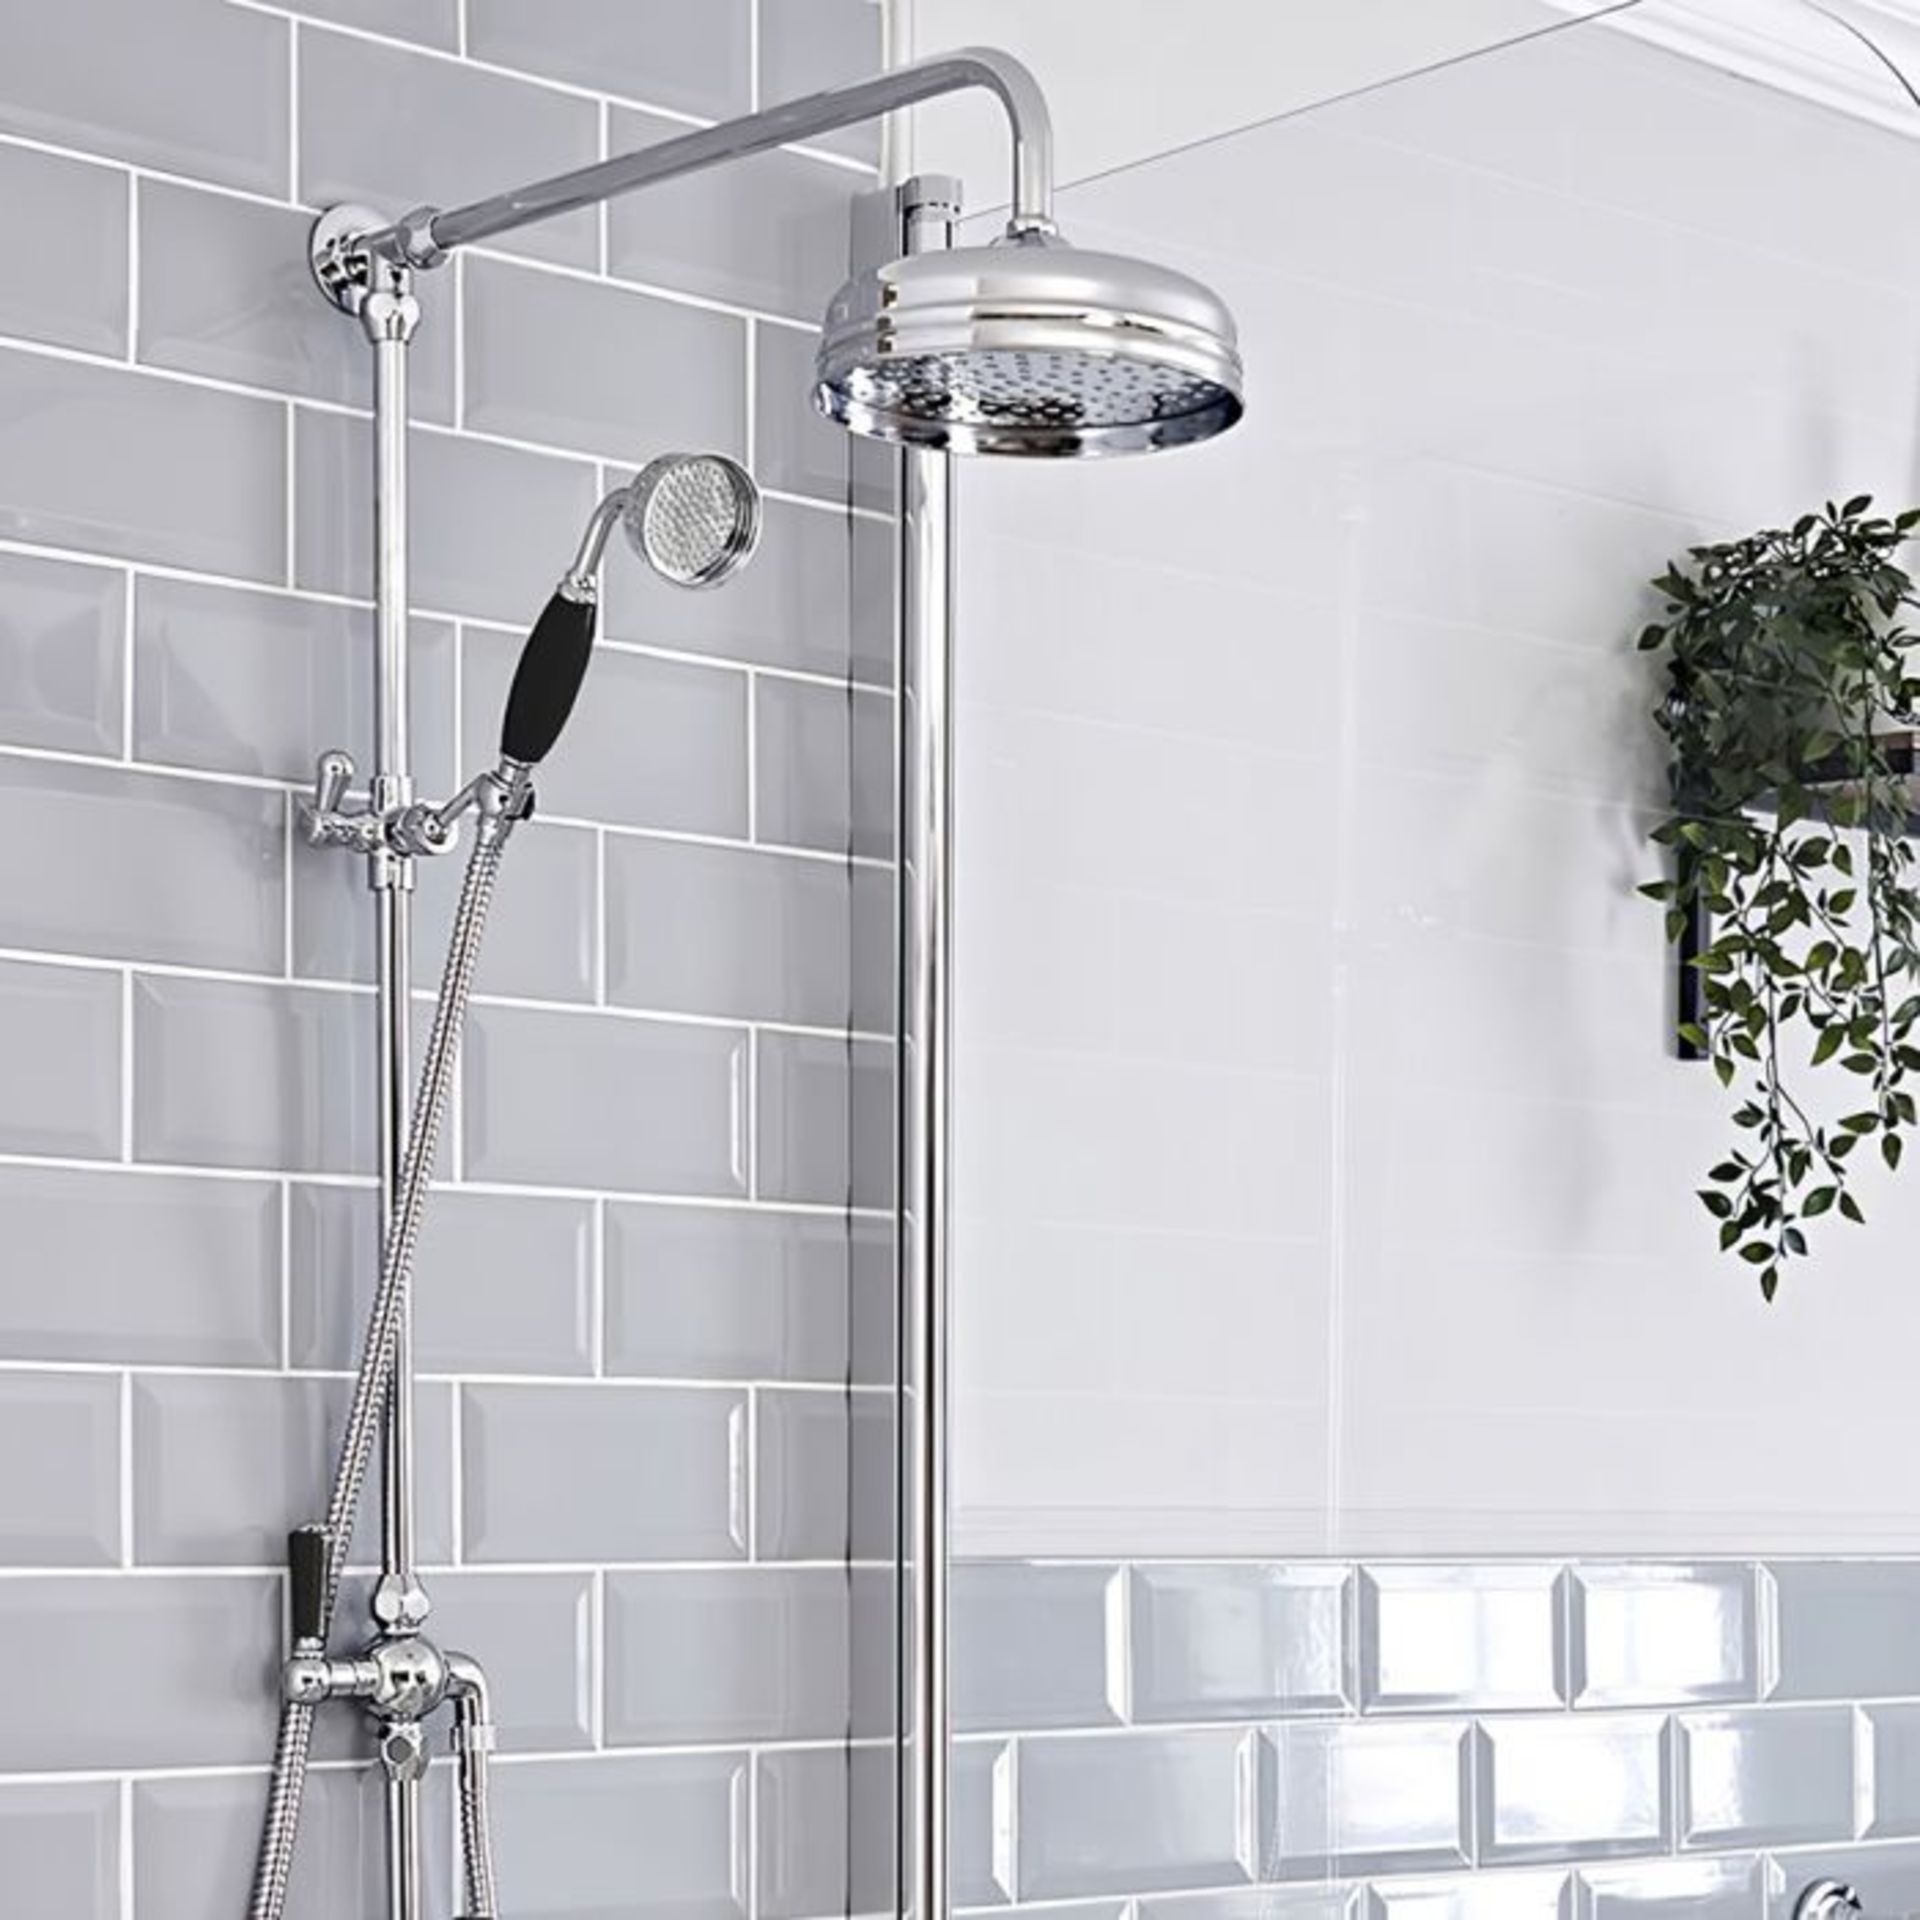 New & Boxed Chrome With Black Accents - Traditional Thermostatic Exposed Mixer Shower Set. Sp68... - Image 3 of 3